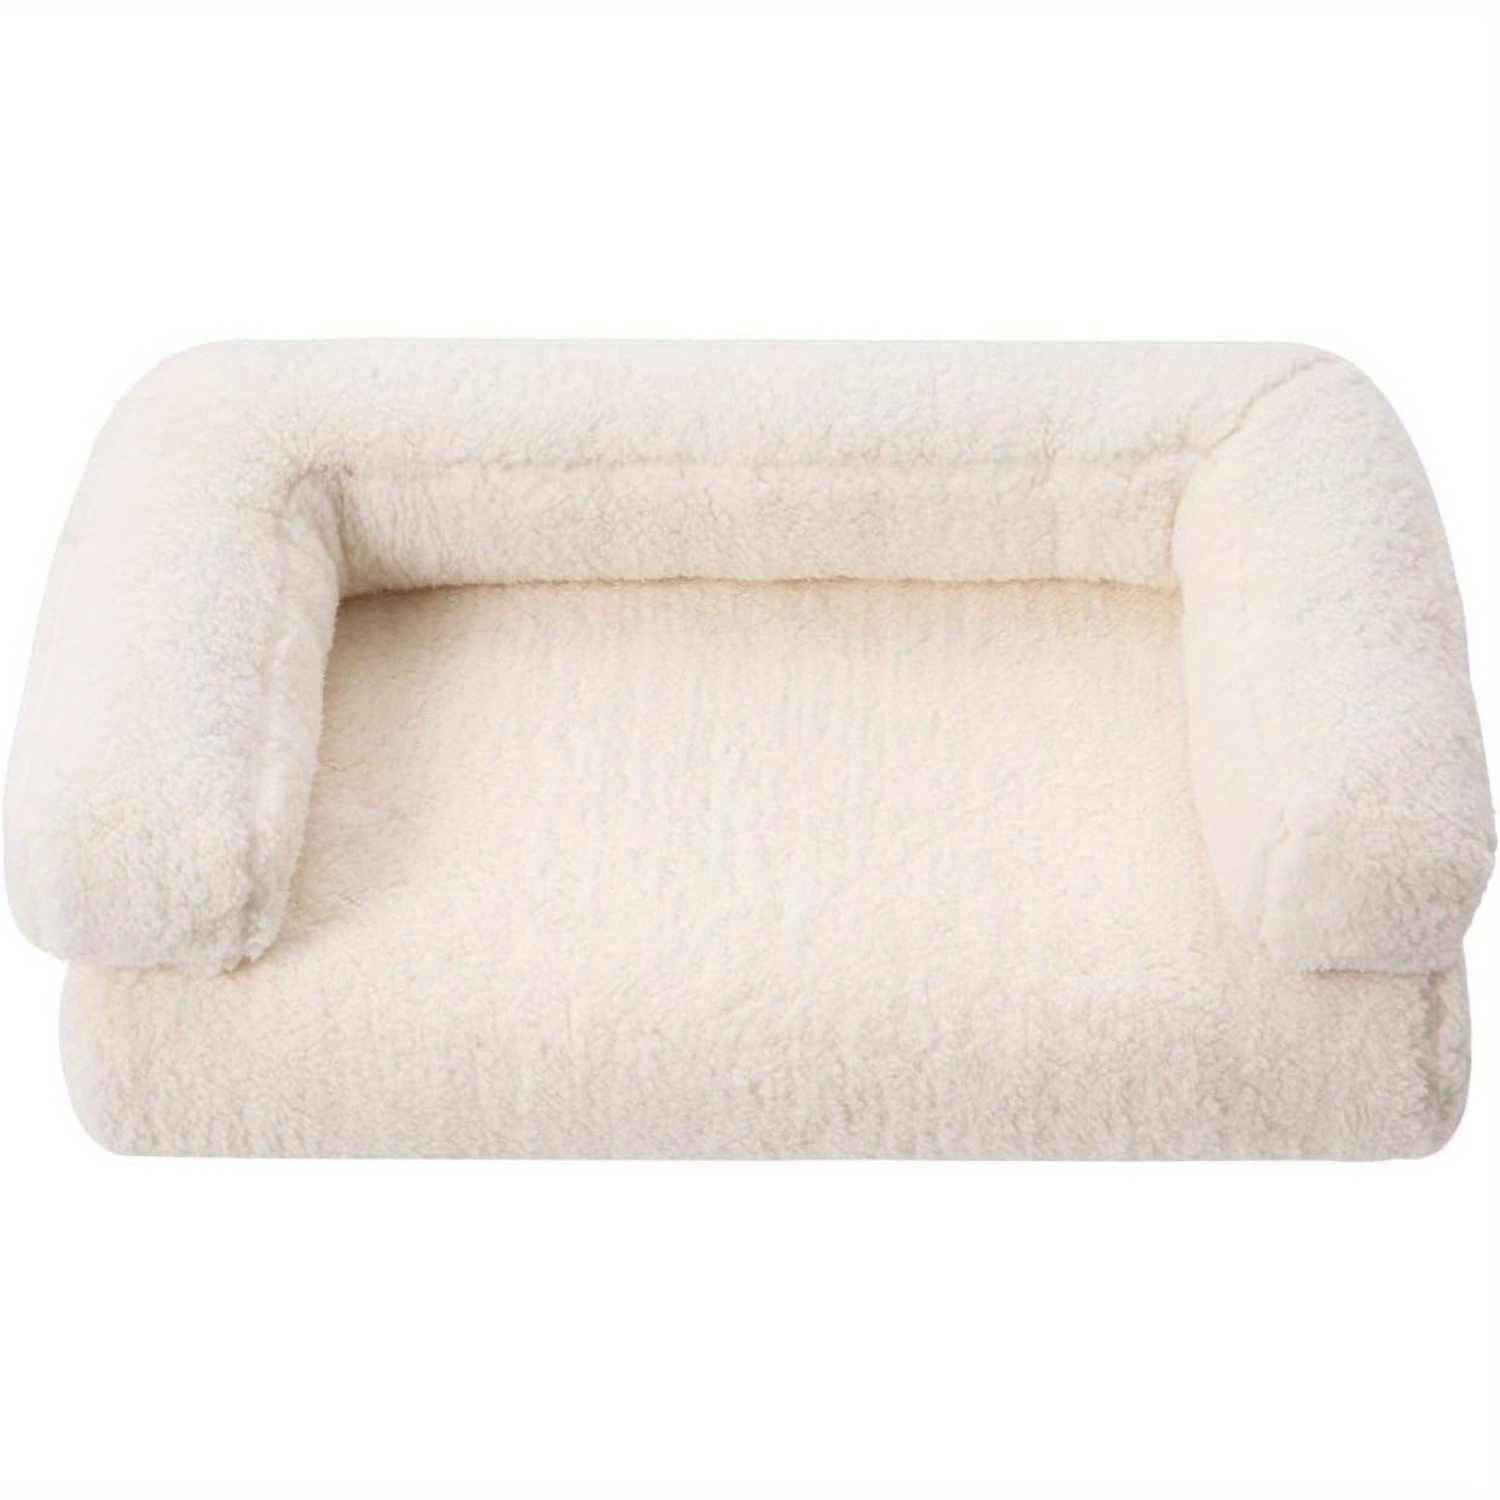 

Royalcraft Small Dog Bed With Anti-slip Bottom, Cat Bed With Removable Washable Cover, Plush Pet Bed For Dogs And Cats, White Cute Dog Pillow Bed, Calming Cat Couch Bed For Indoor, Outdoor